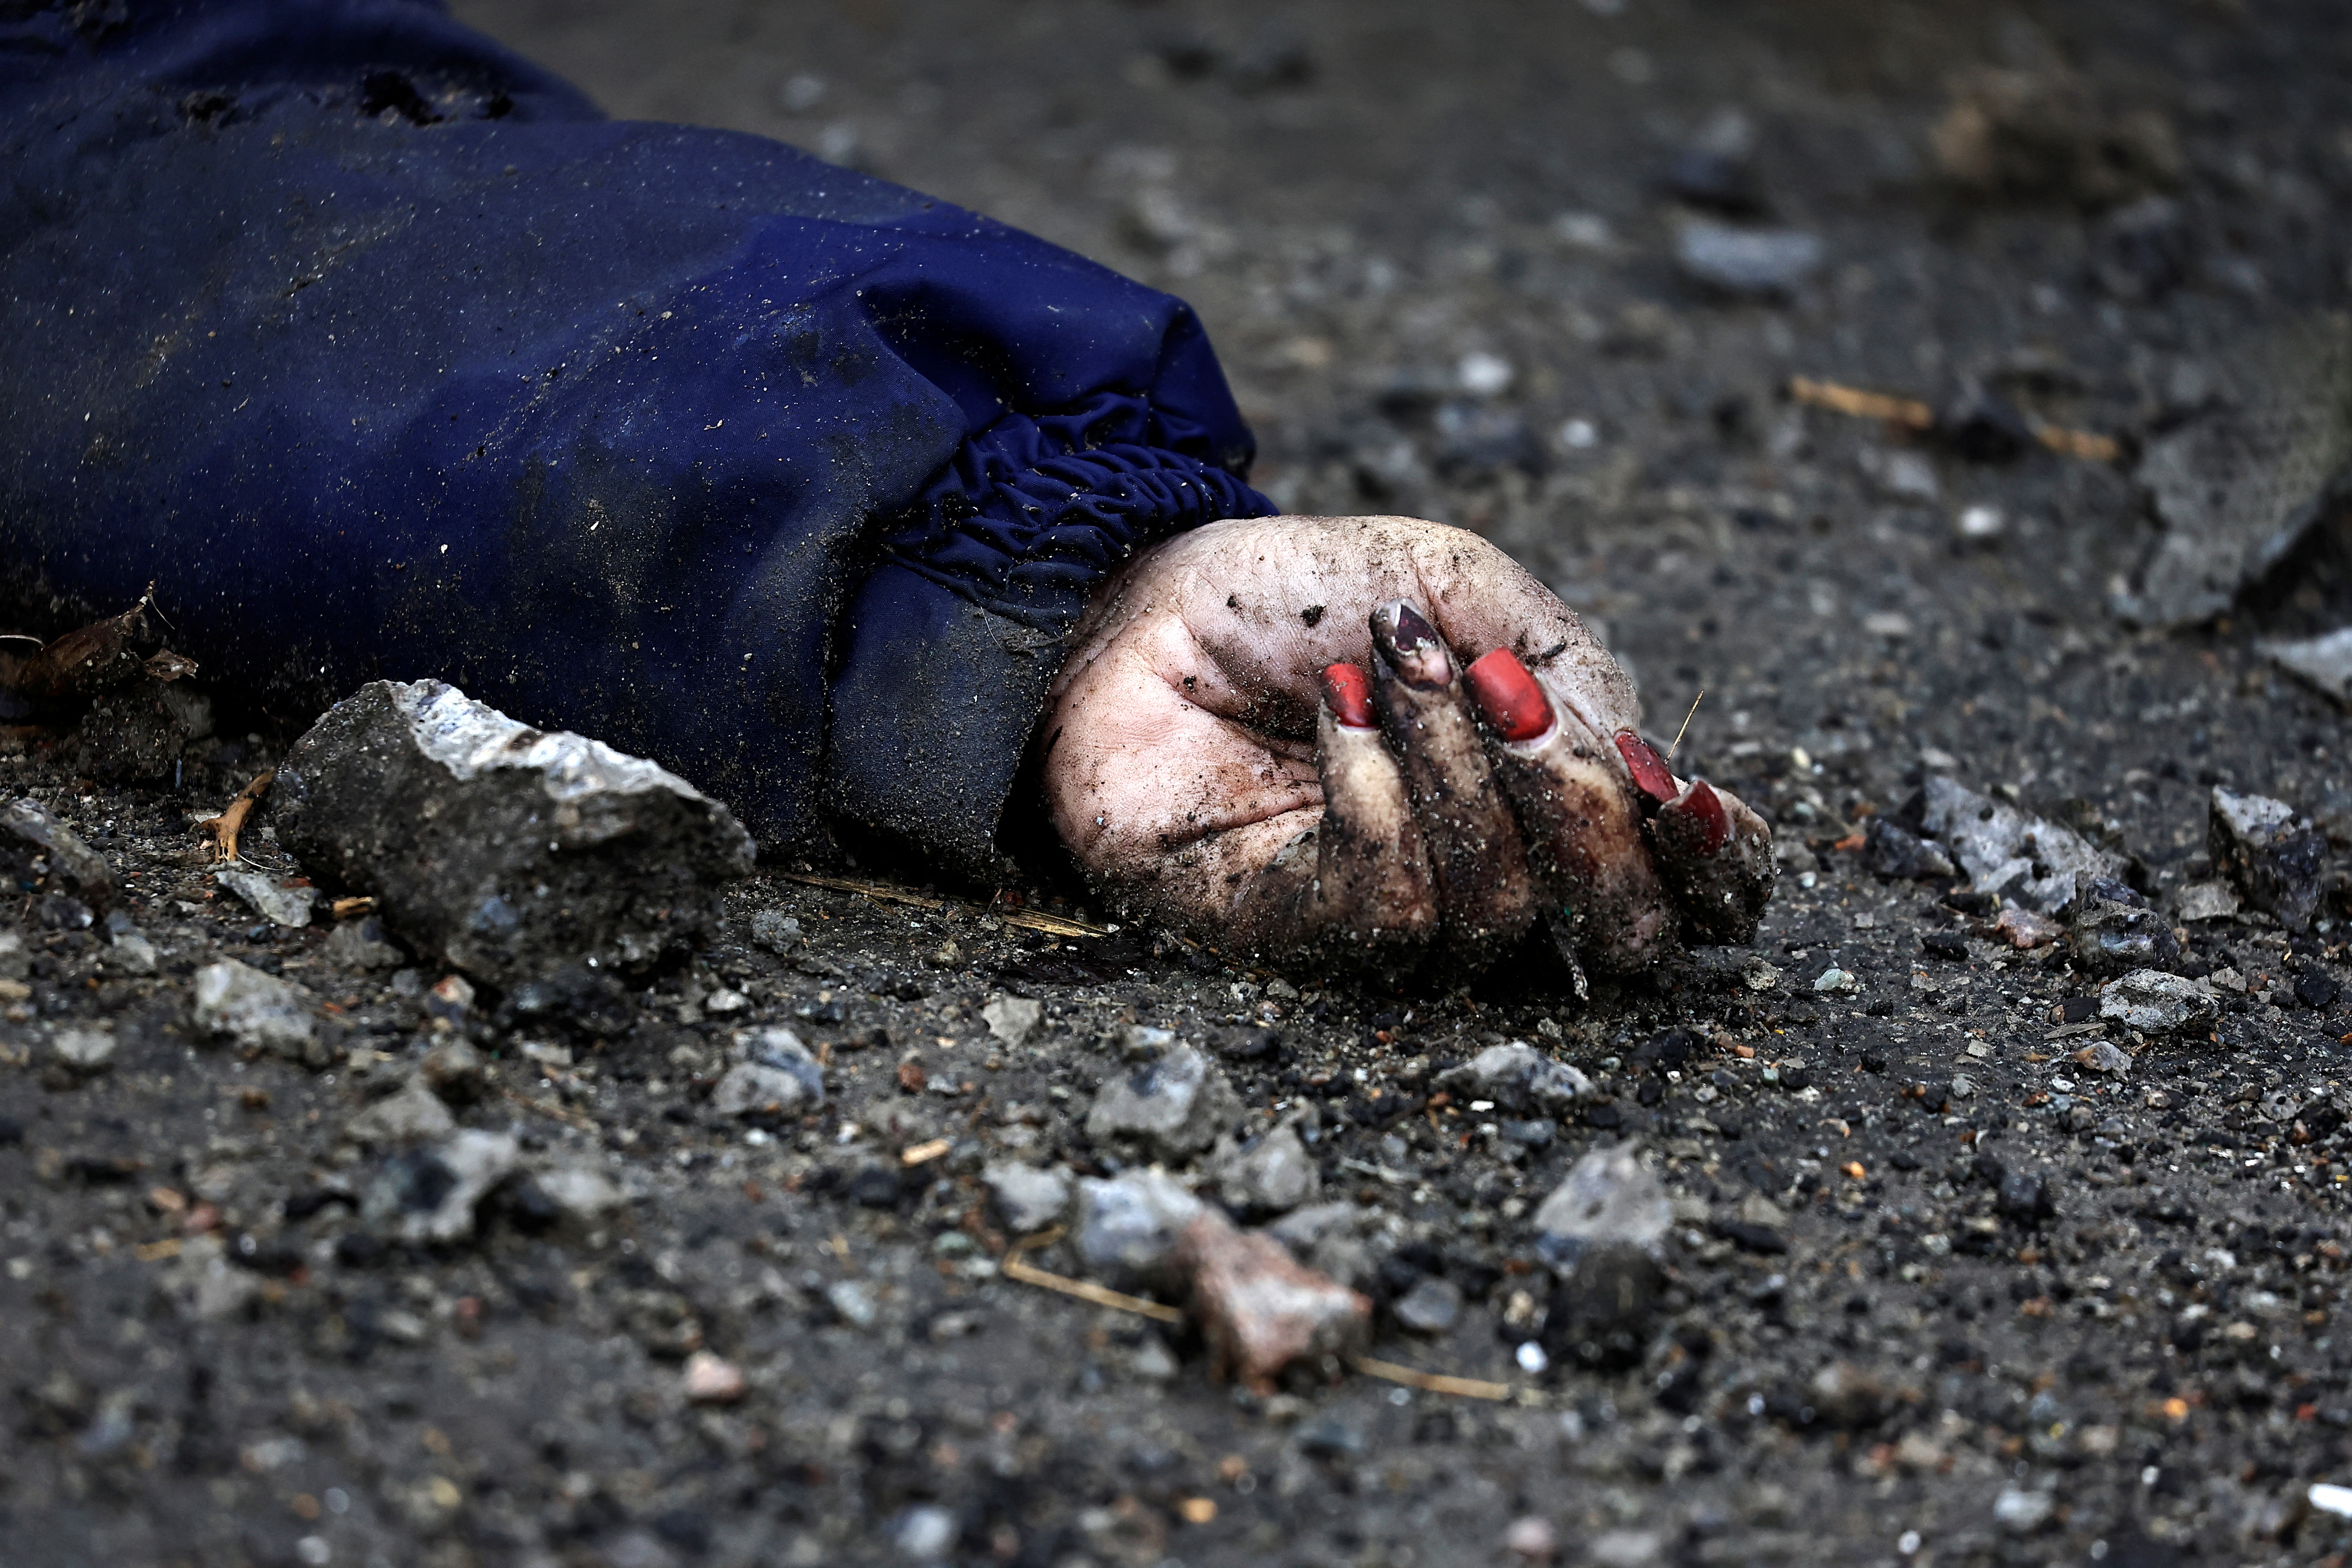 SENSITIVE MATERIAL. THIS IMAGE MAY OFFEND OR DISTURB    A body of a woman, who according to residents was killed by Russian army soldiers, lies on the street, amid Russia's invasion of Ukraine, in Bucha, in Kyiv region, Ukraine April 2, 2022. REUTERS/Zohra Bensemra